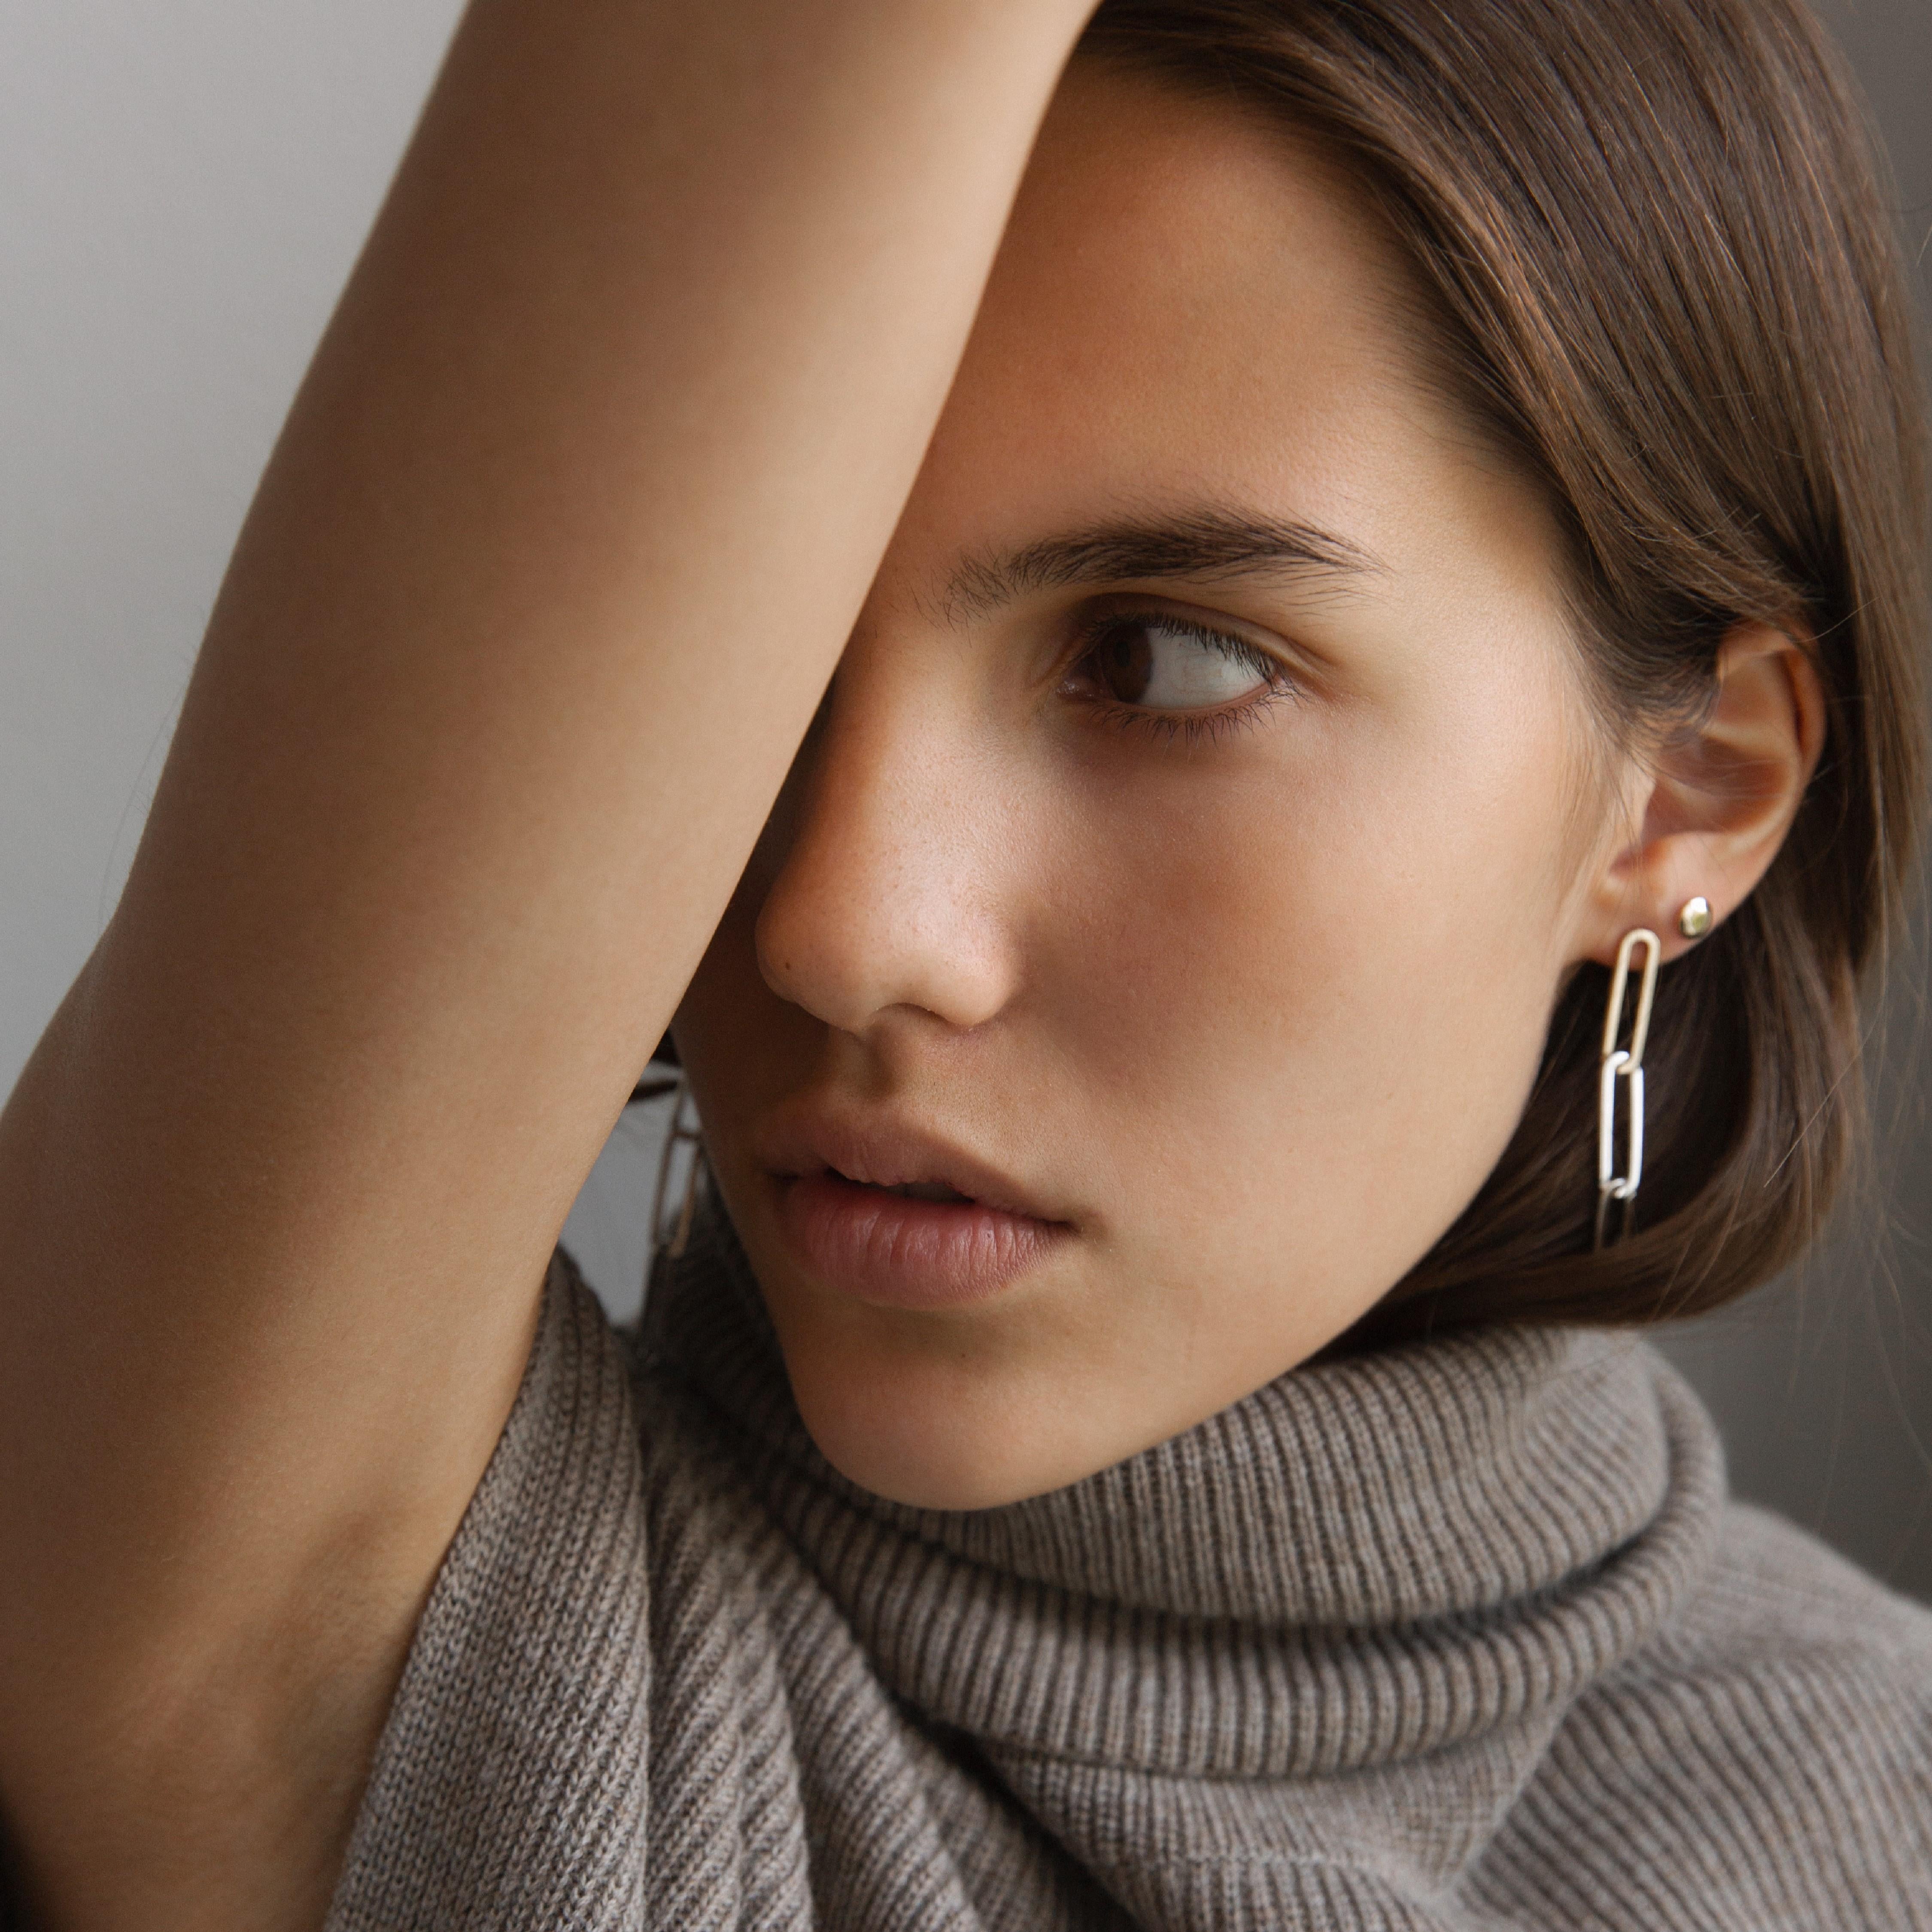 This outstanding pair of earrings is handmade in solid recycled 18k gold interposed with a single link in silver. The links are designed according to the ancient art of Japanese wood joinery – where the links fit neatly together when still, but come